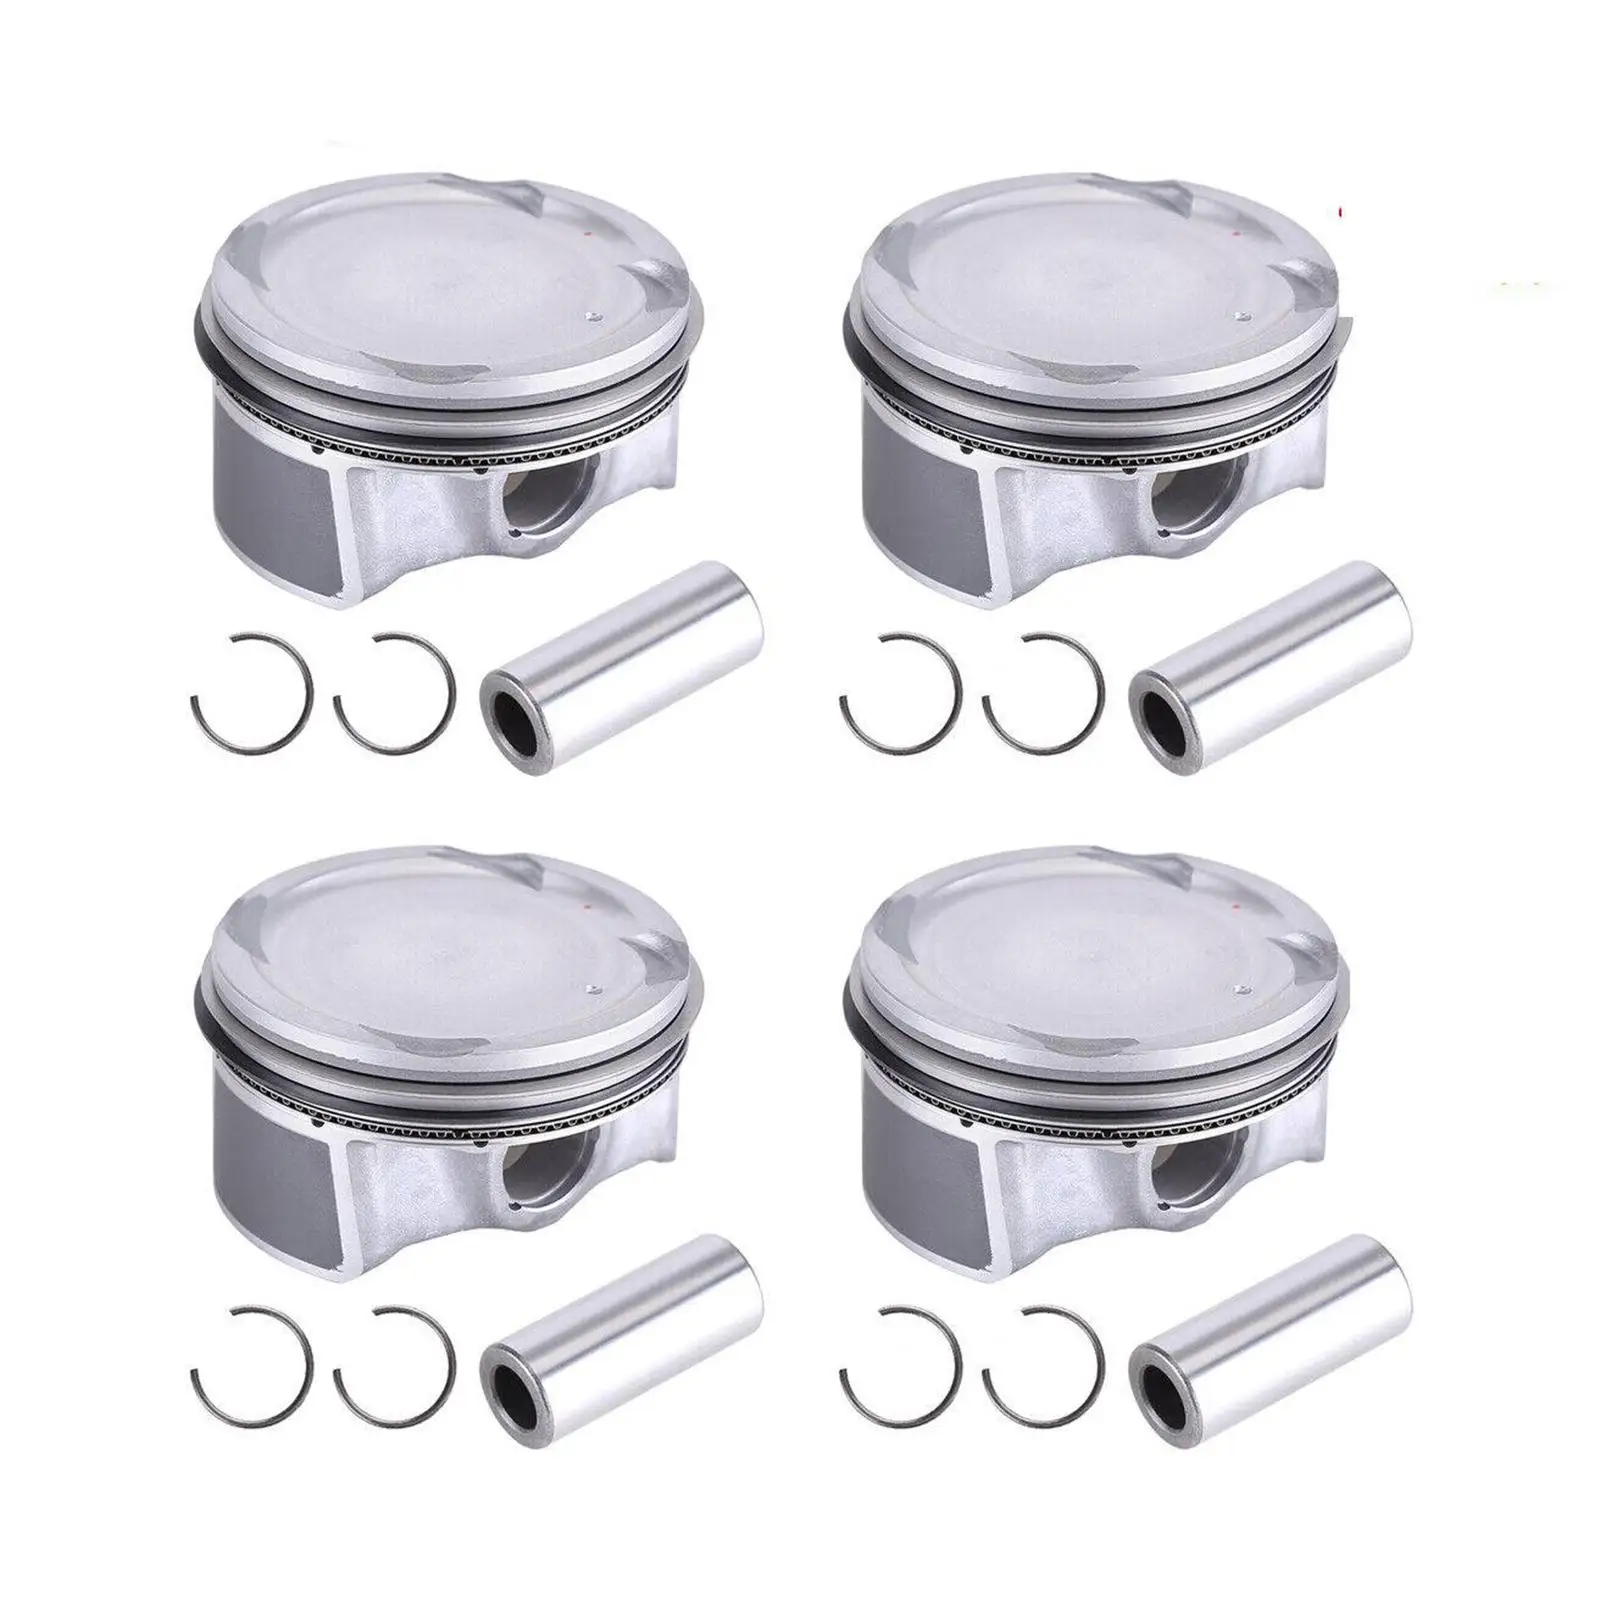 4 Pieces 230412E100 Replaces Durable Spare Parts Piston Set Engine Piston & Pin Ring Assembly for Kia Forte 2.0L 2014-2018